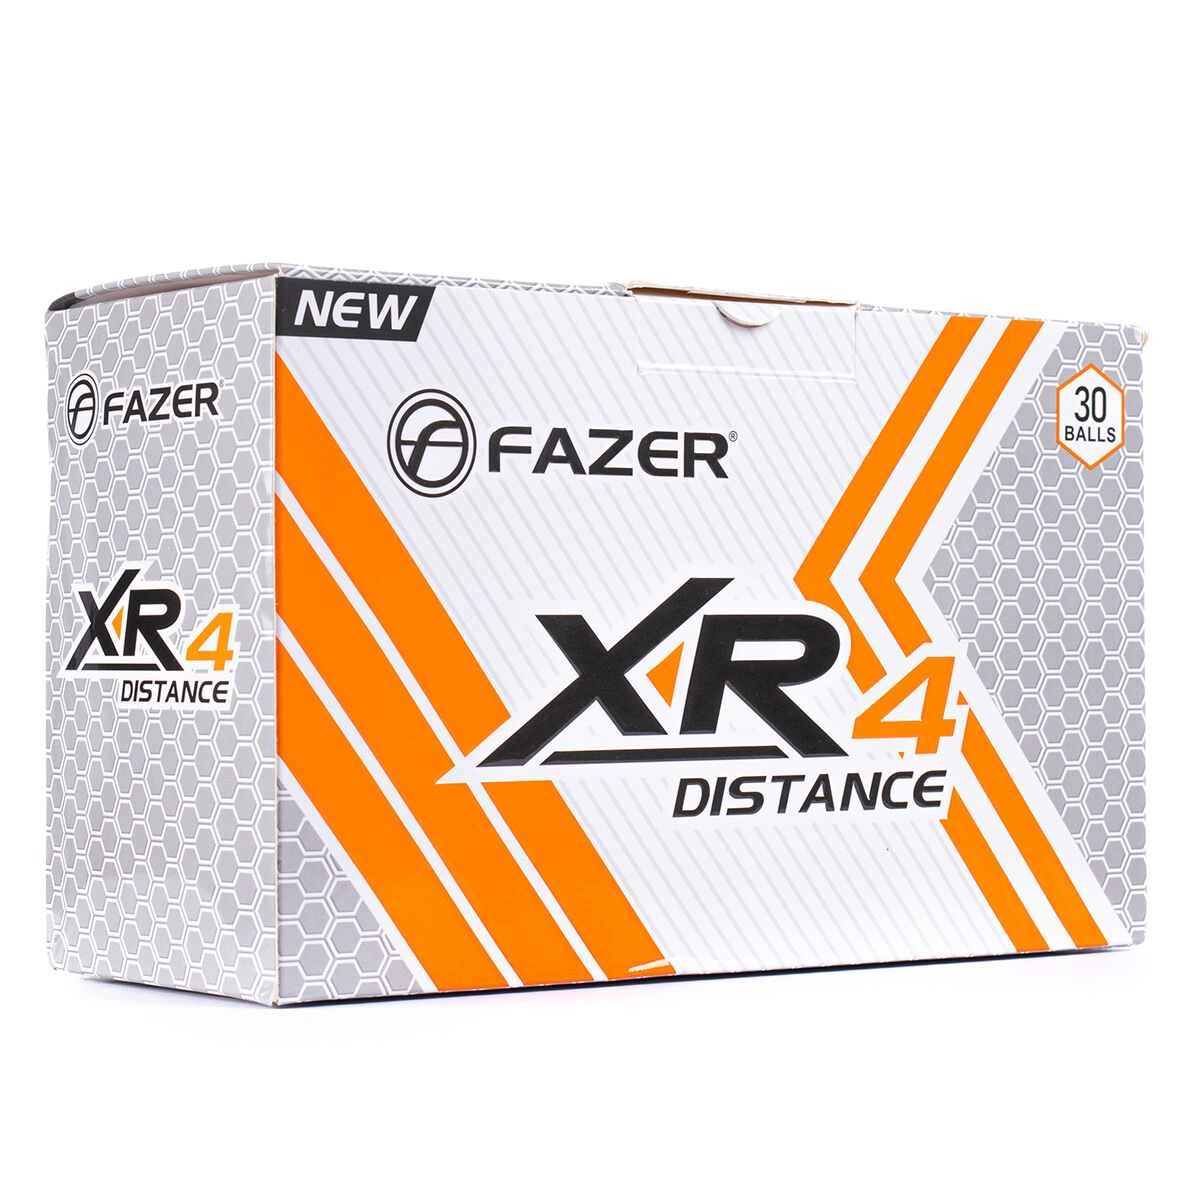 Fazer White Dimple XR4 Distance 30 Golf Balls Pack, Size: One Size | American Golf